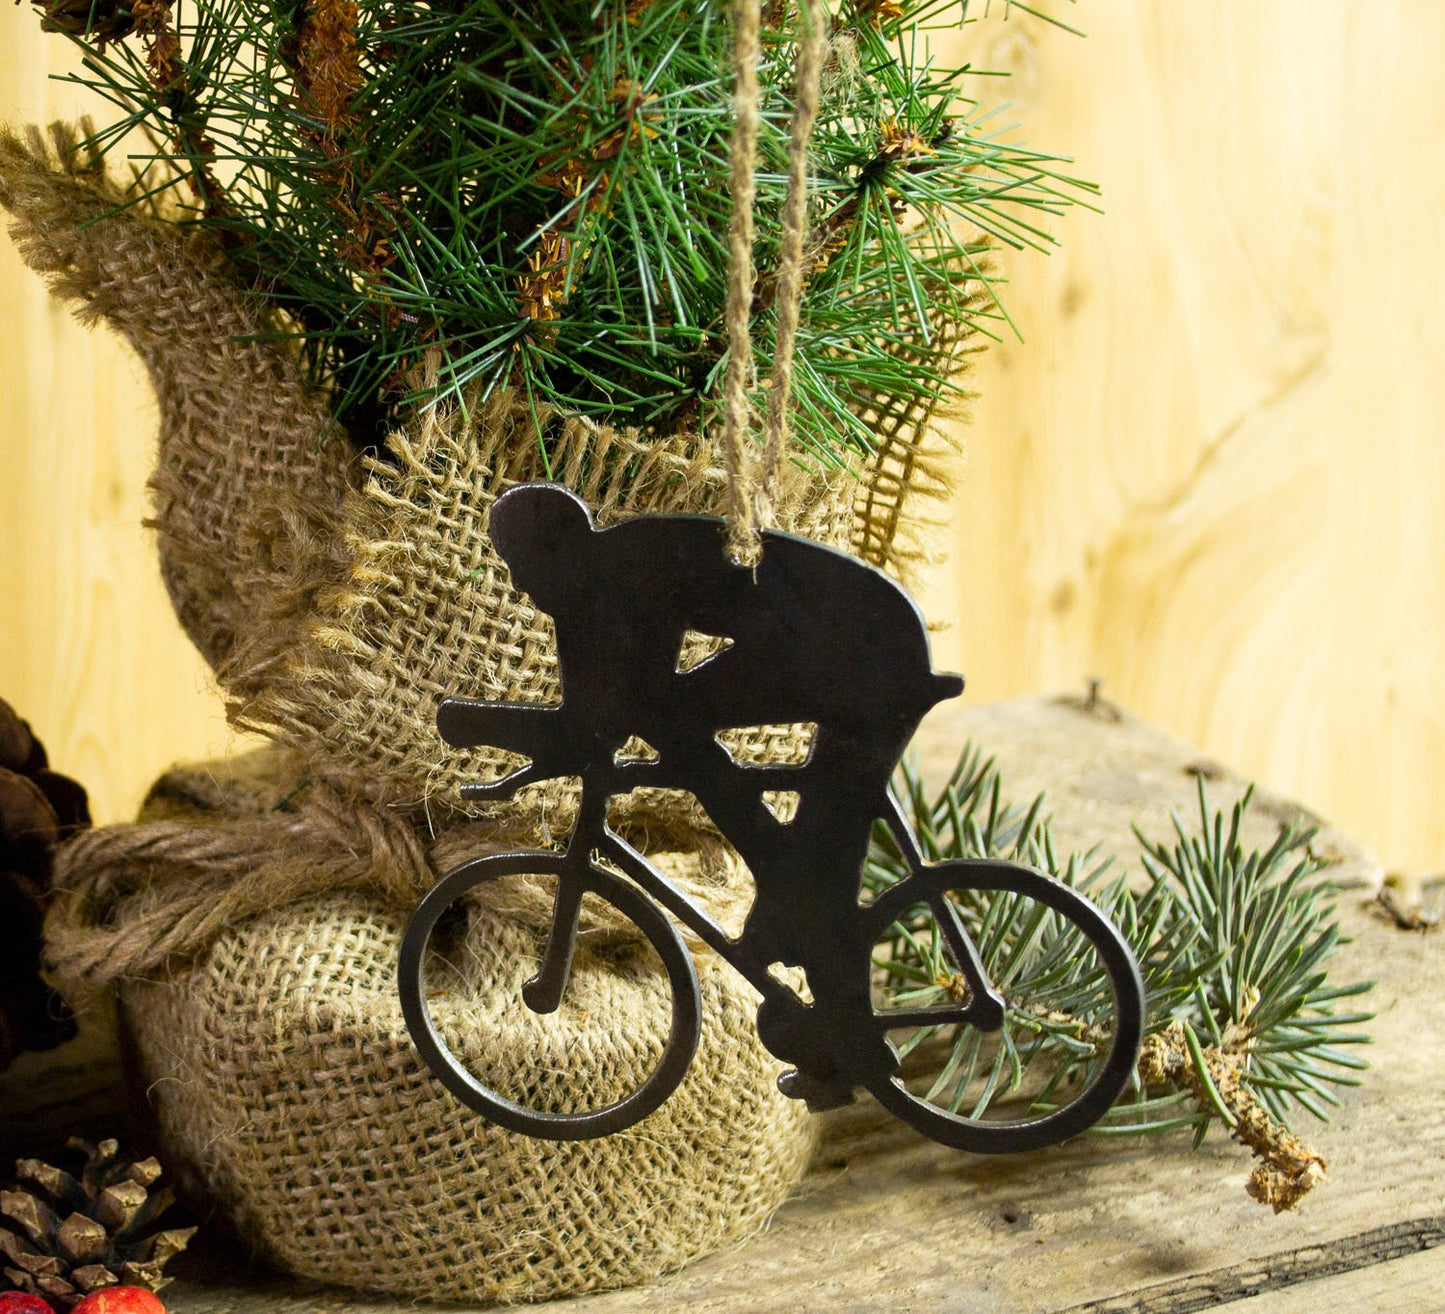 Cyclist Bicycle Metal Christmas Tree Ornament Holiday Decoration Raw Steel Gift Recycled Nature Home Decor